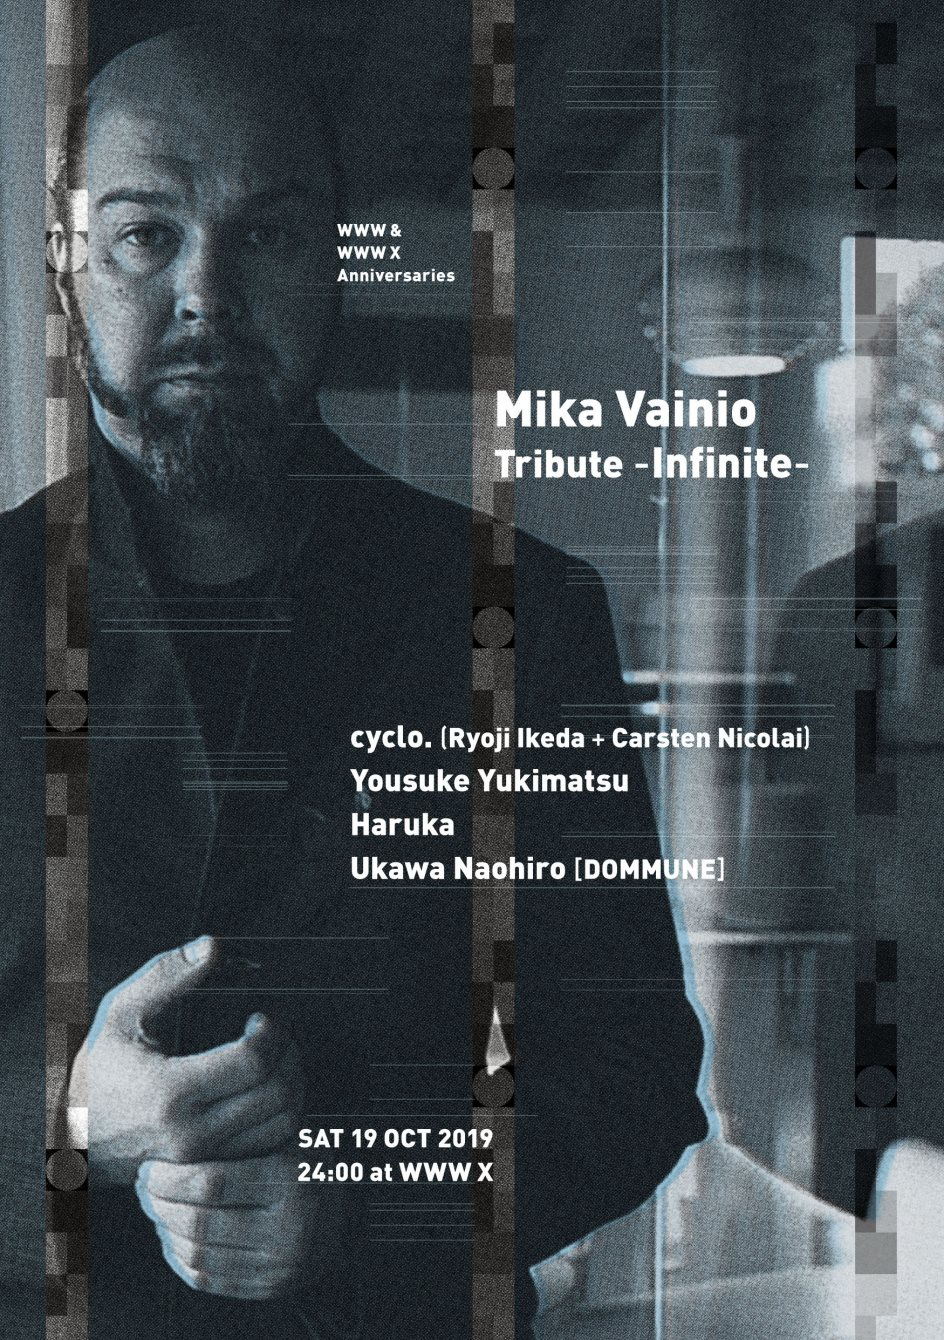 Mika Vainio Tribute - Infinite - with Cyclo. WWW & WWW X Anniversaries - Flyer front